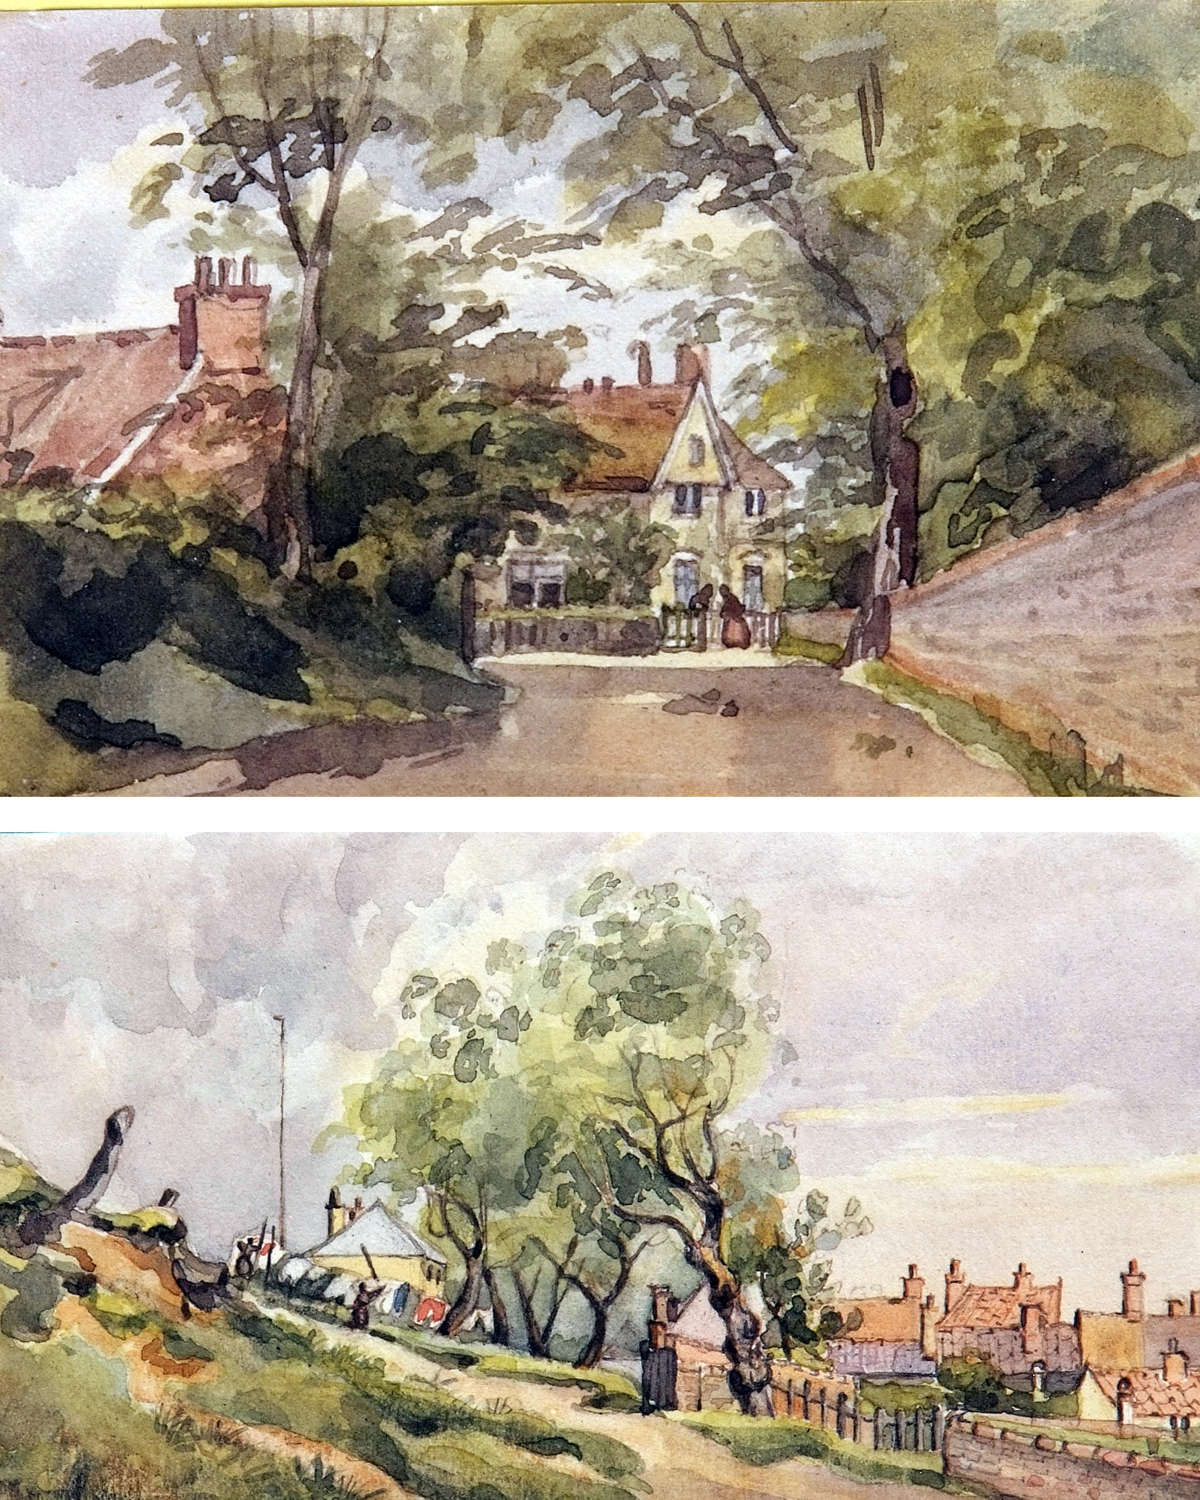 THOMAS CHURCHYARD (1798-1865, BRITISH) 
Landscapes
two watercolours
2 ½ x 4 ins and 2 ¾ x 5